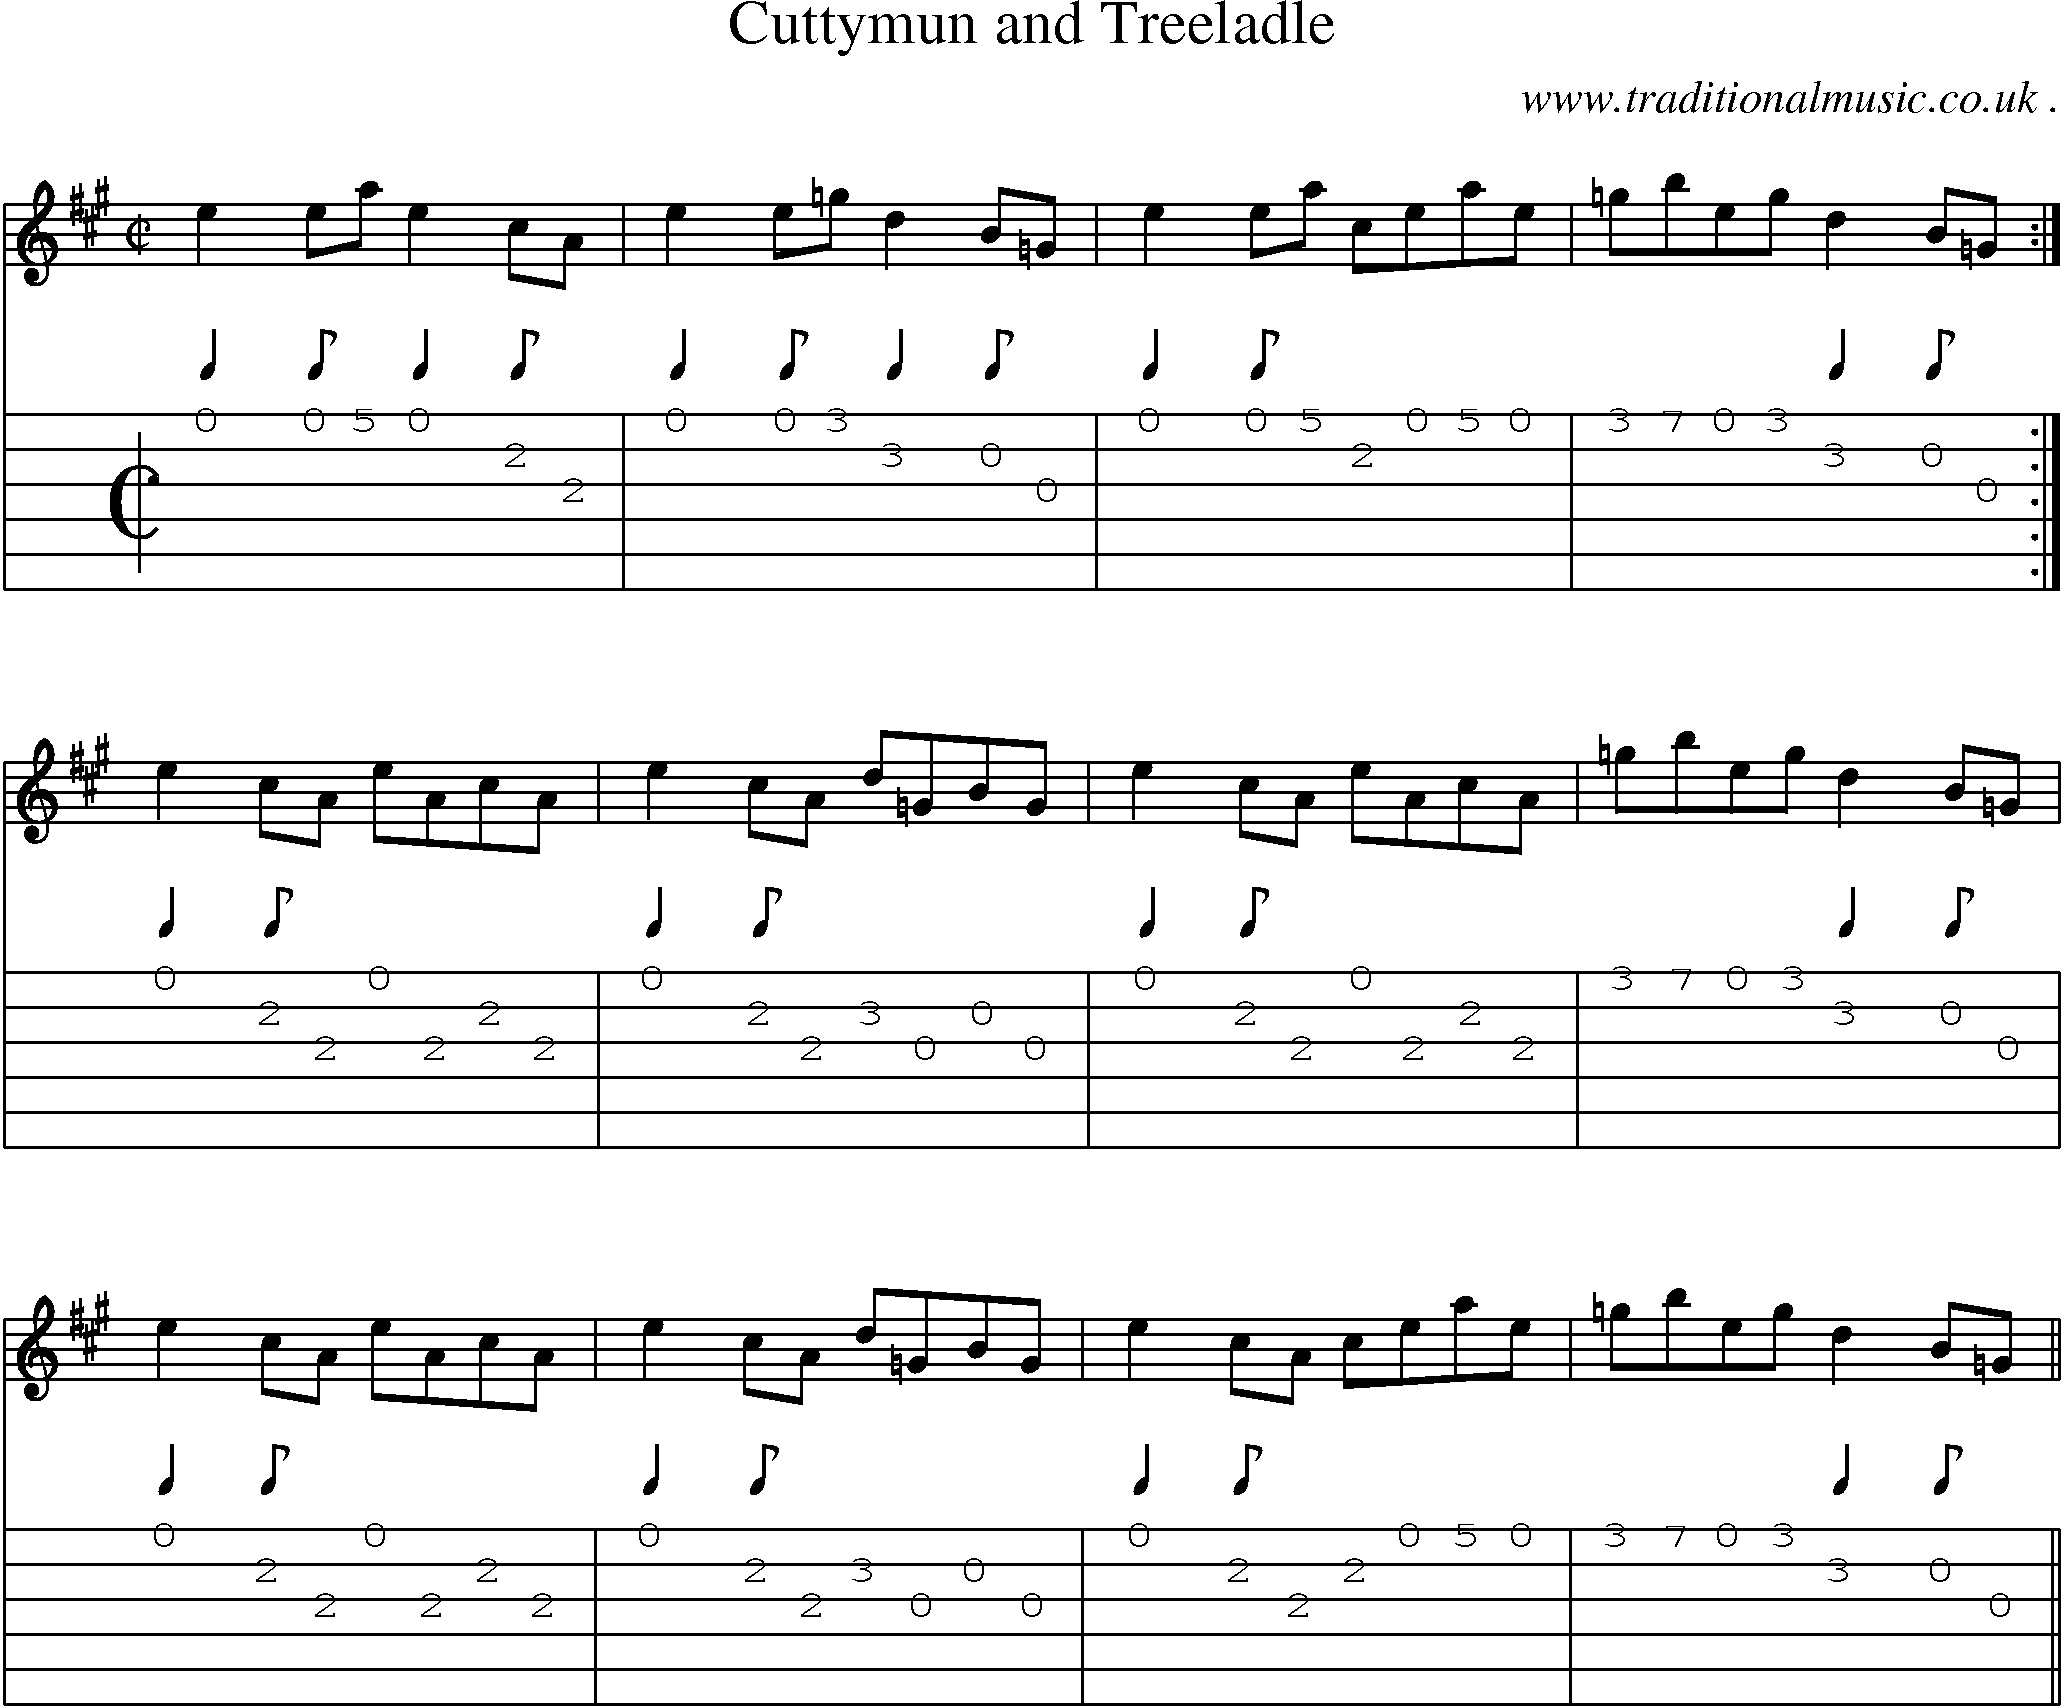 Sheet-music  score, Chords and Guitar Tabs for Cuttymun And Treeladle